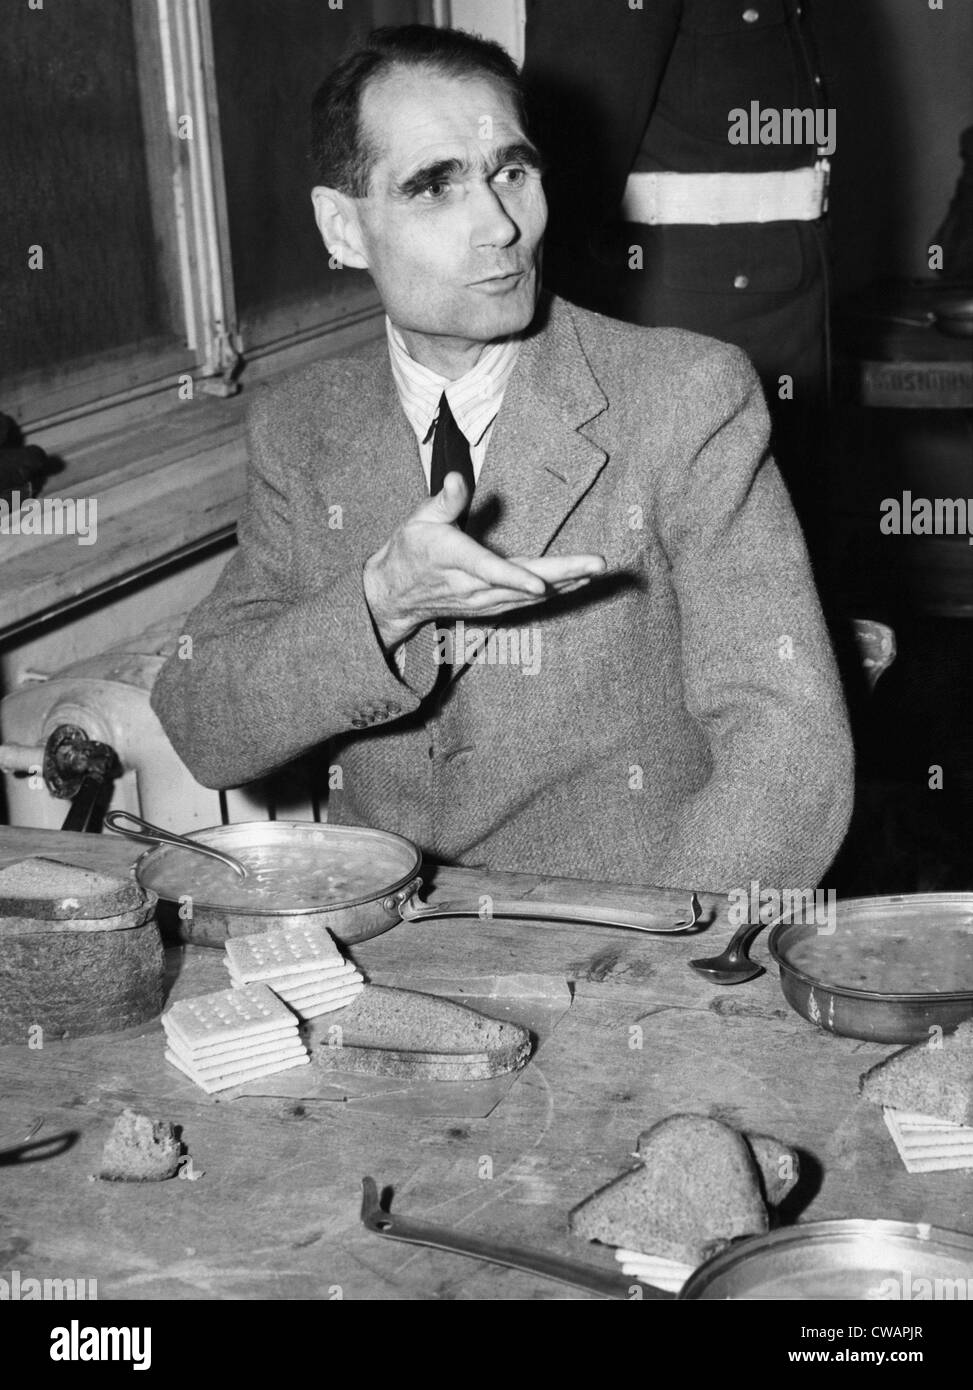 Nazi war criminal Rudolph Hess eating between sessions at the Nuremberg trials, 1945. Courtesy: CSU Archives / Everett Stock Photo